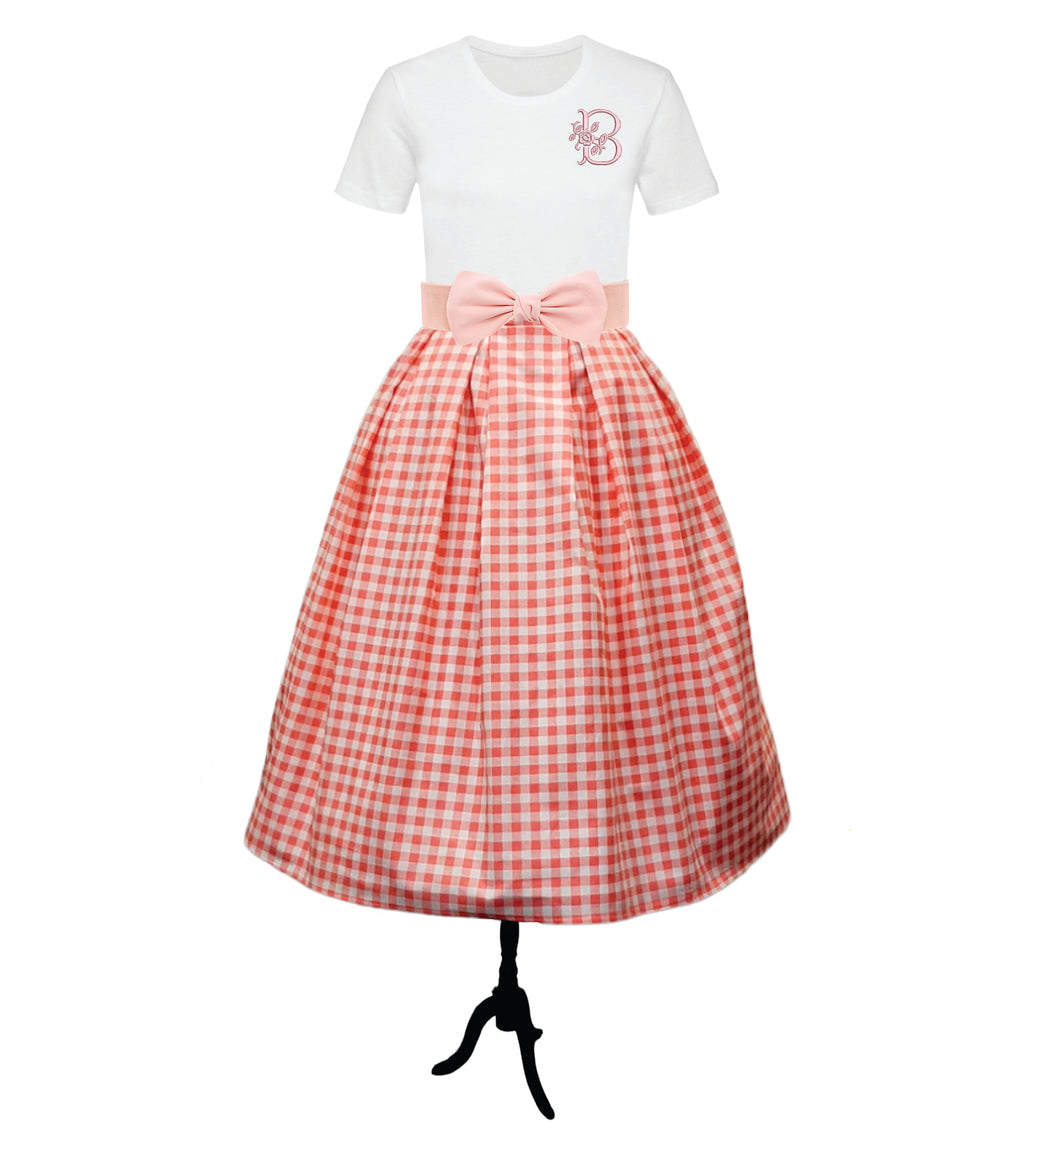 Barbie Inspired Pink and White Gingham Skirt